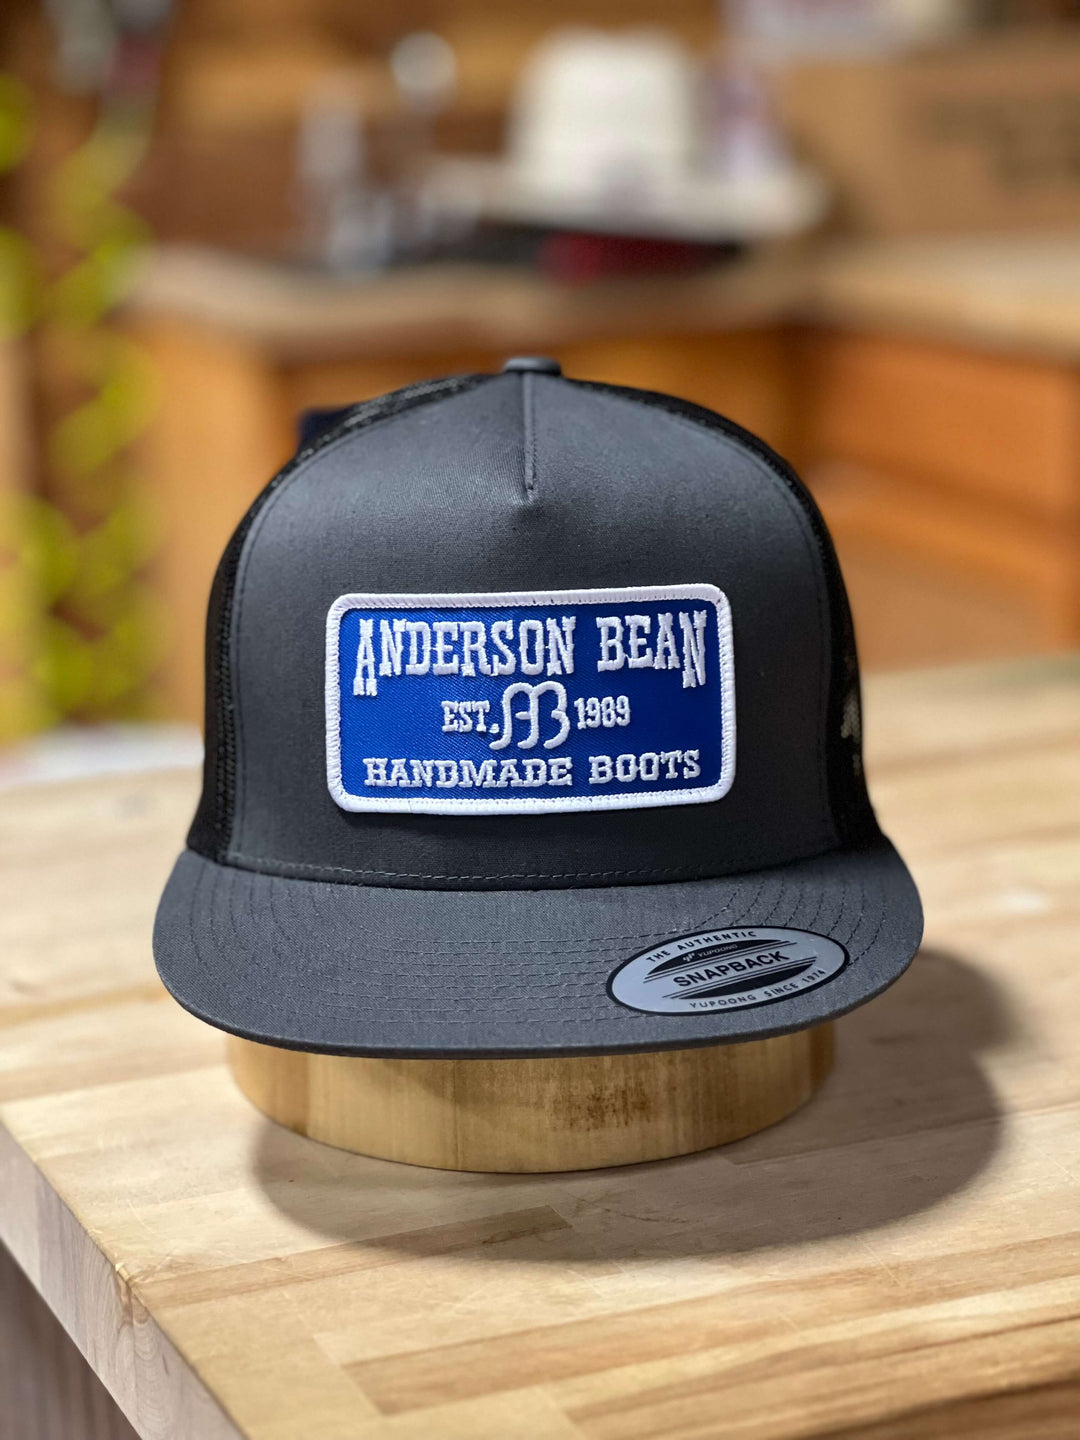 Anderson Bean Handmade Boots snapback hat, black front, black mesh, blue and white logo 